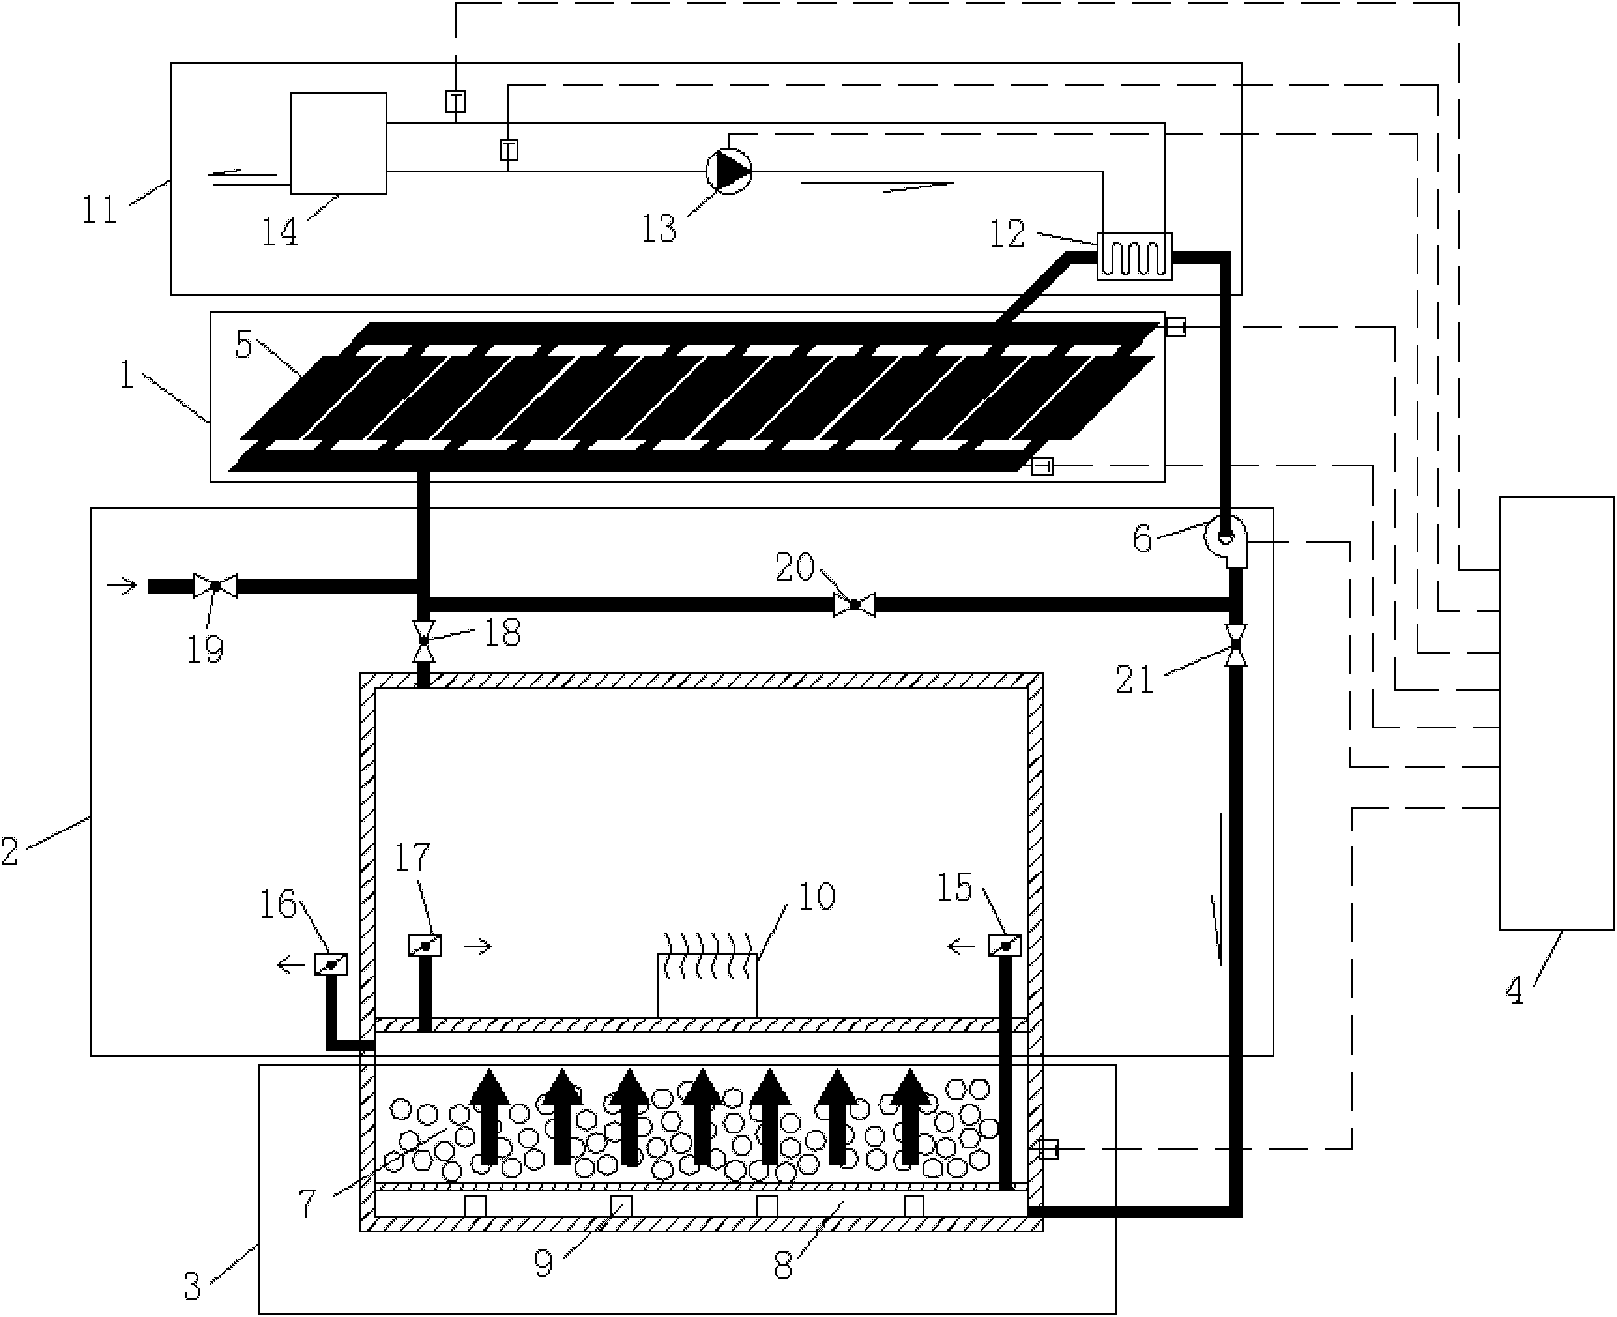 Building heat supplying and heating system based on solar air heat collector